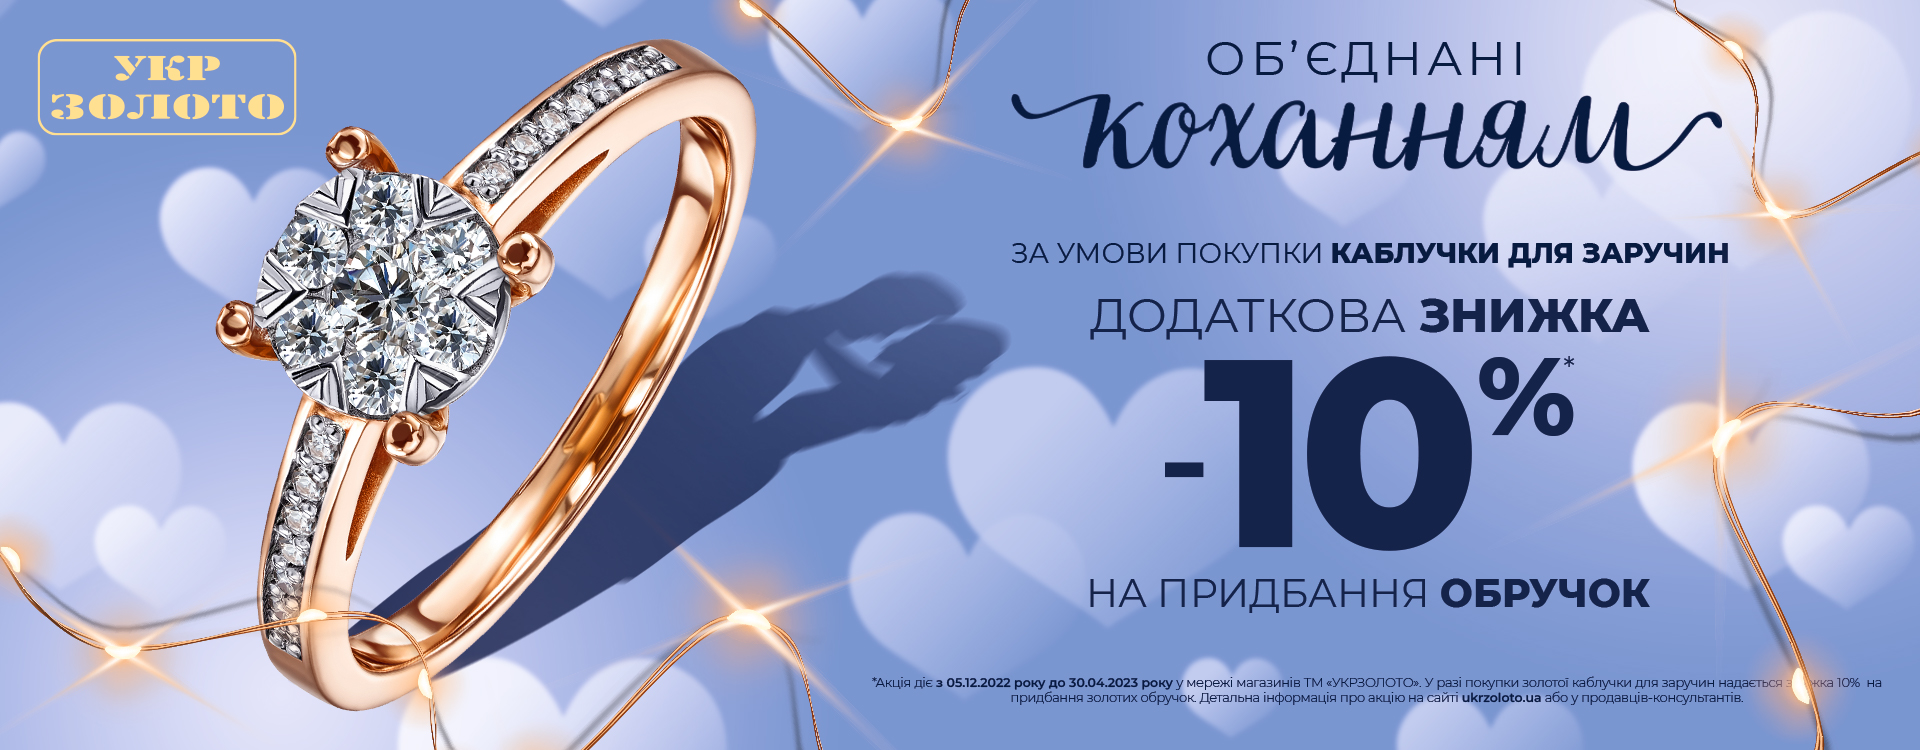 Additional discount - 10% on wedding rings